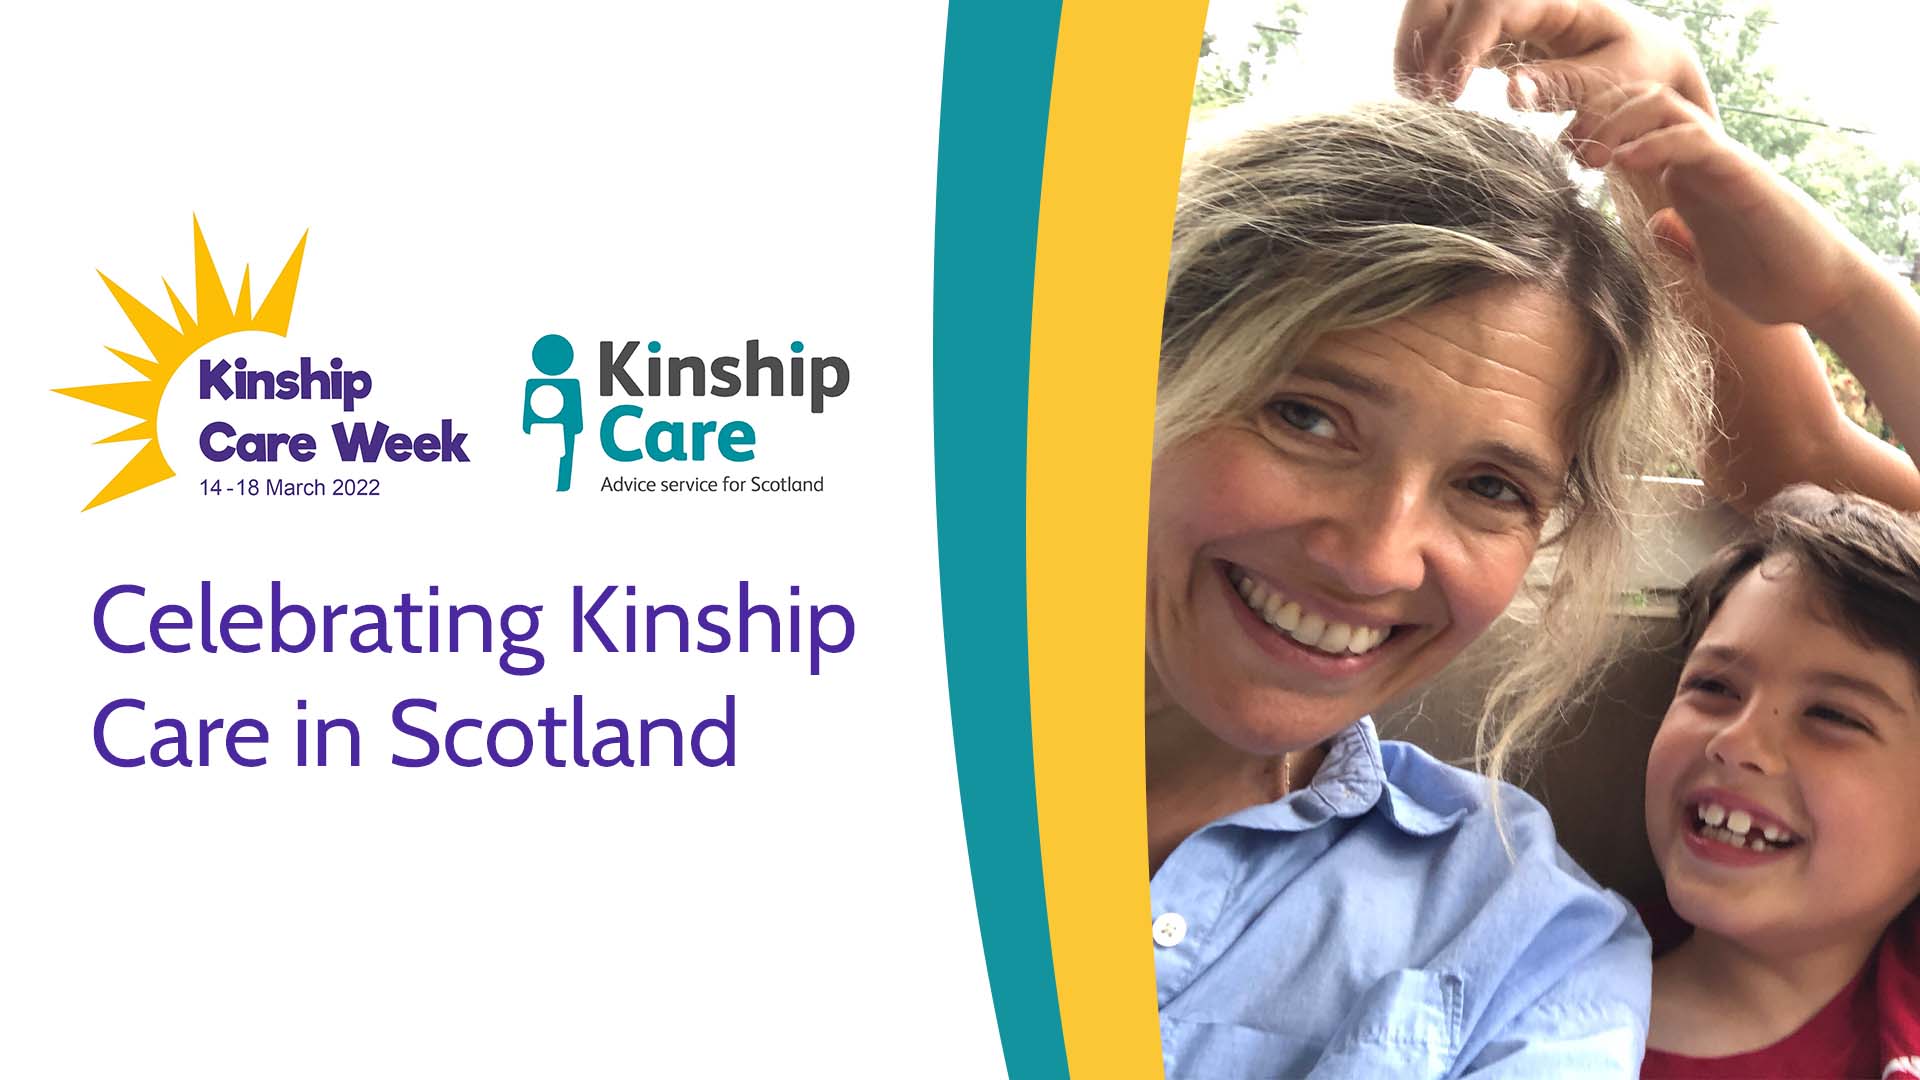 Image of woman with young girl, with slogan Kinship Care Week 2022: Celebrating Kinship Care in Scotland